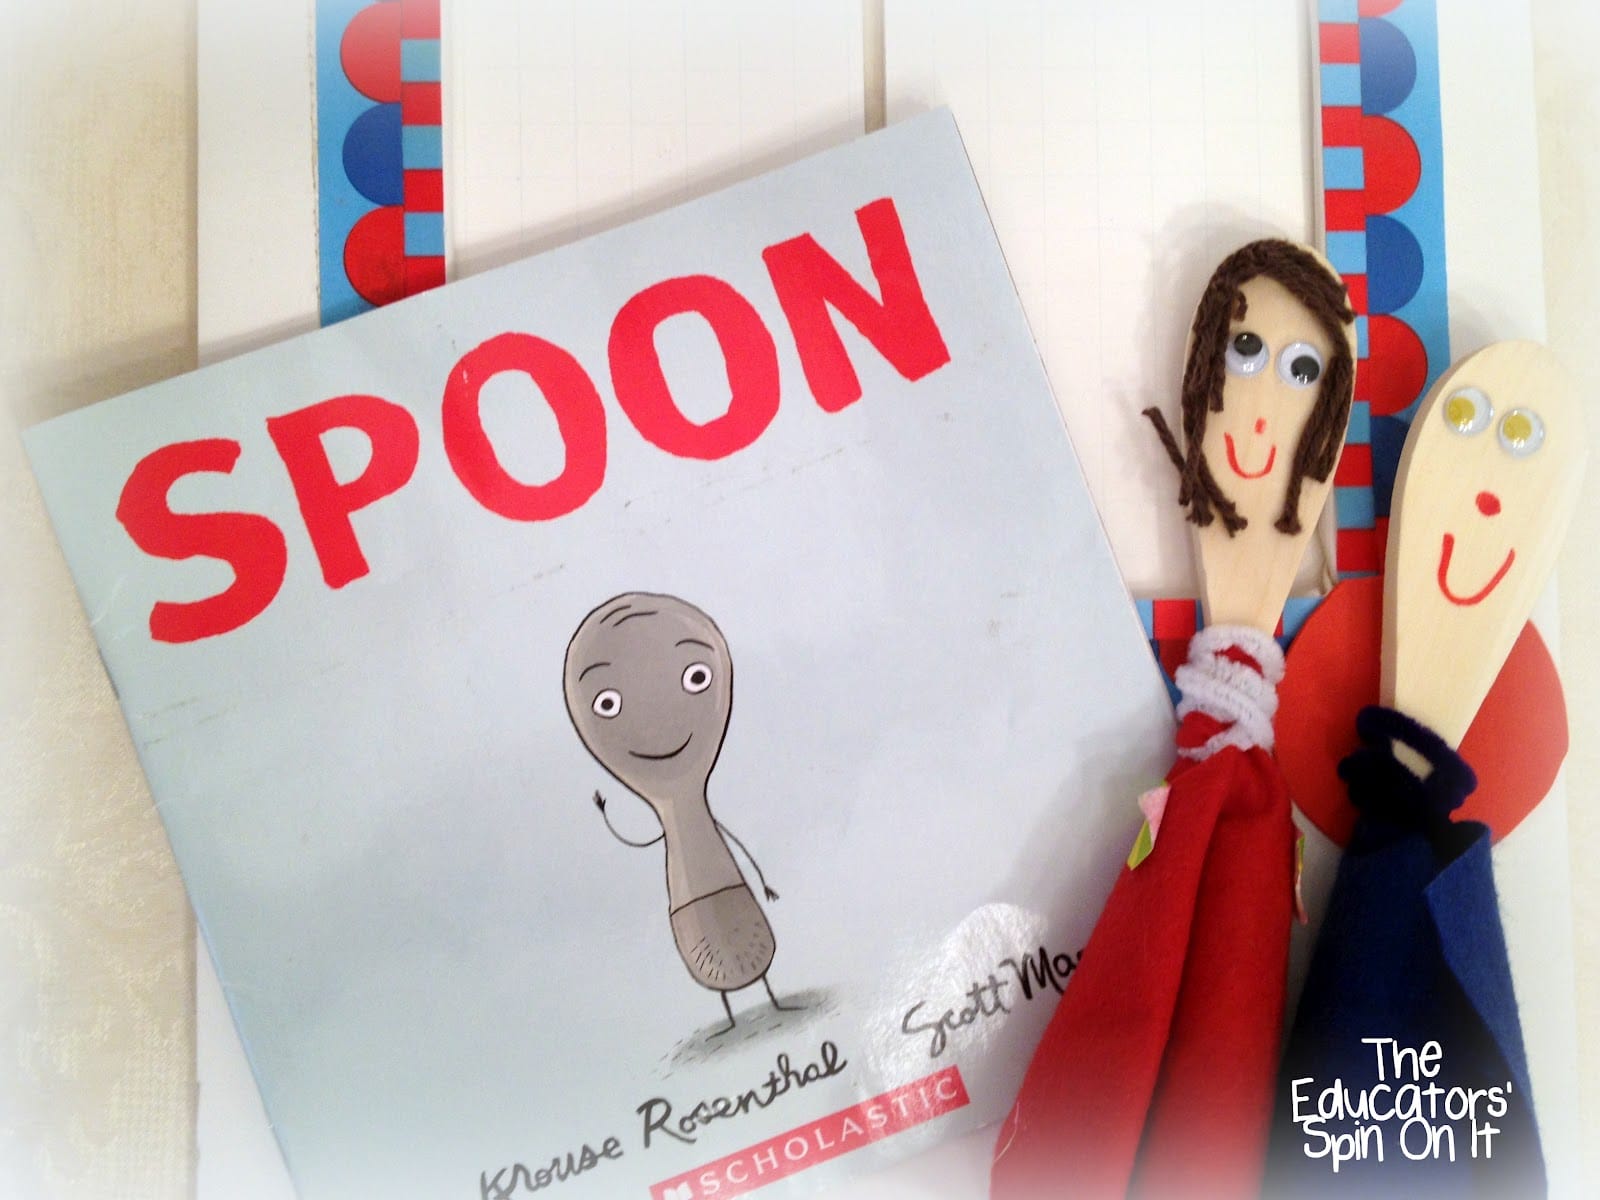 Love Books: Spoon by Amy Krouse Rosenthal - The Educators' Spin On It